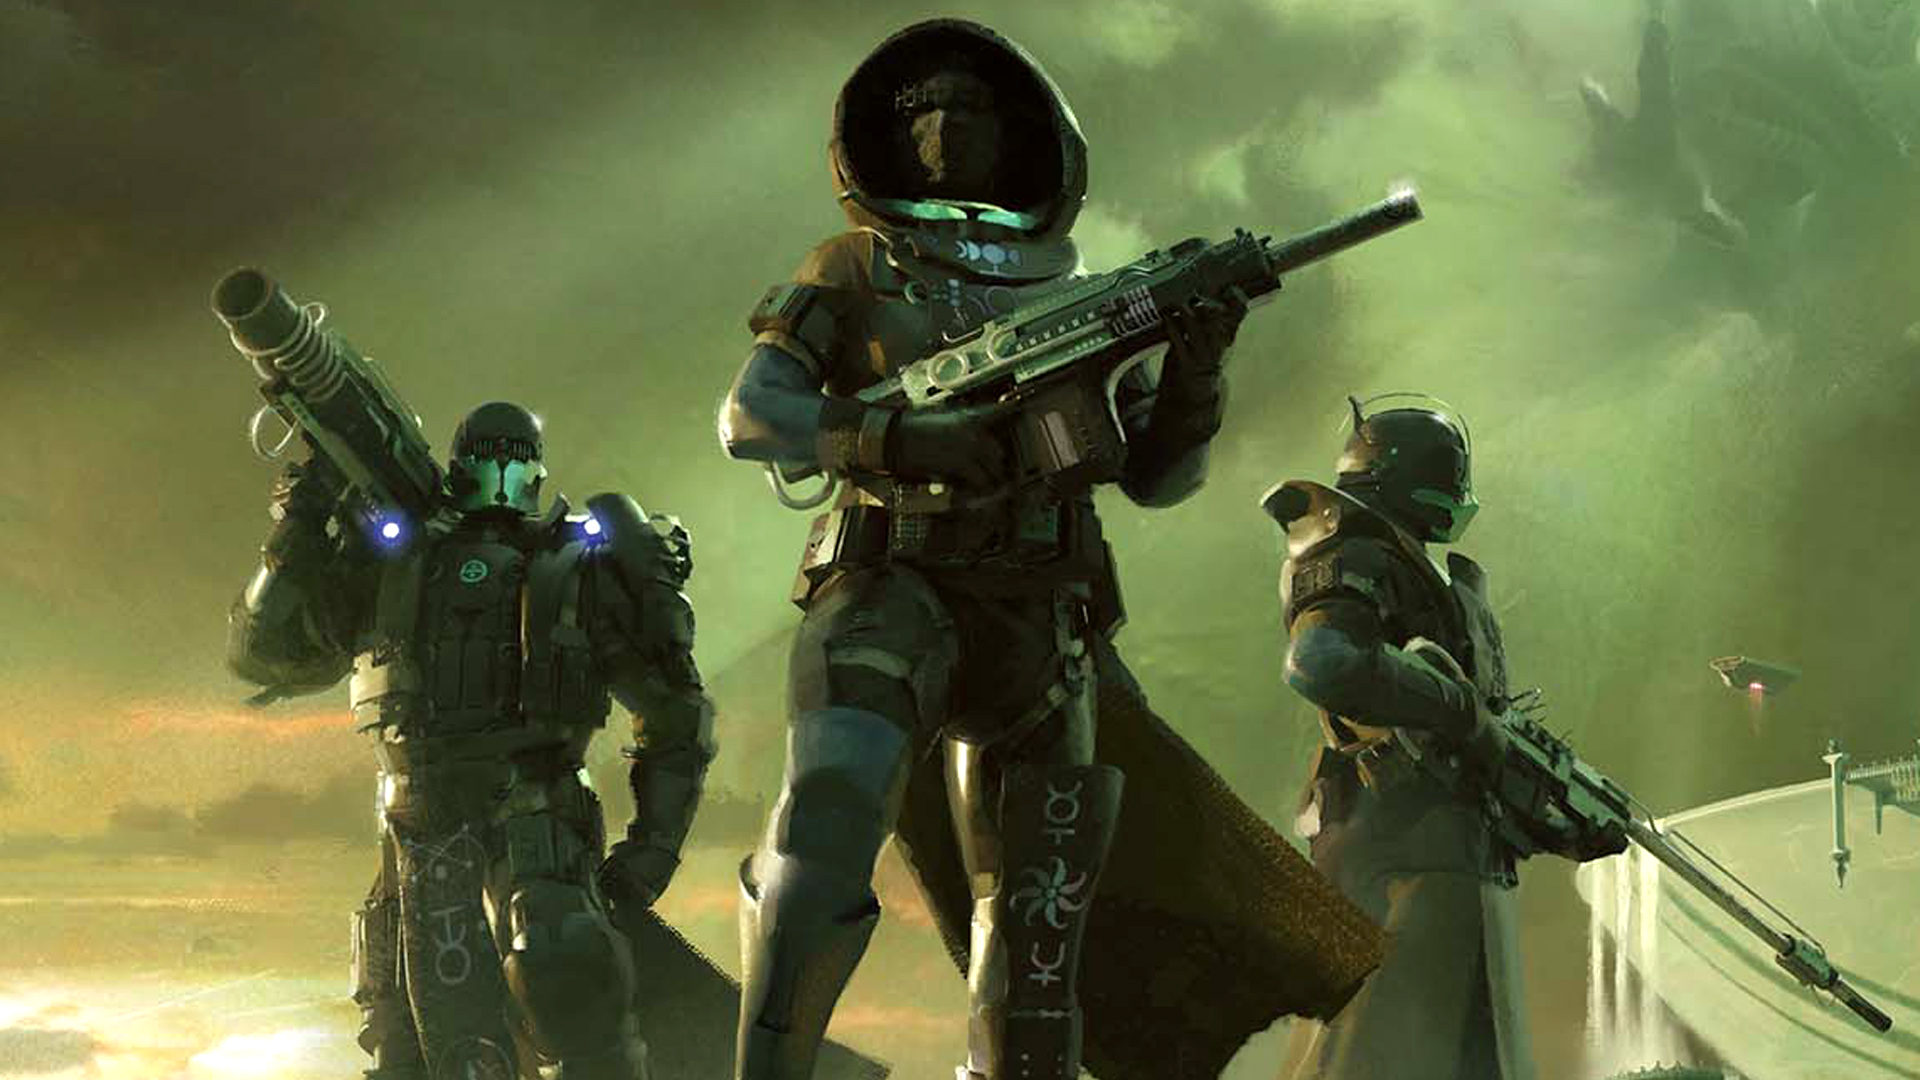 Here's why Destiny 2's Witch Queen quests feel like “Star Trek or The Mandalorian”